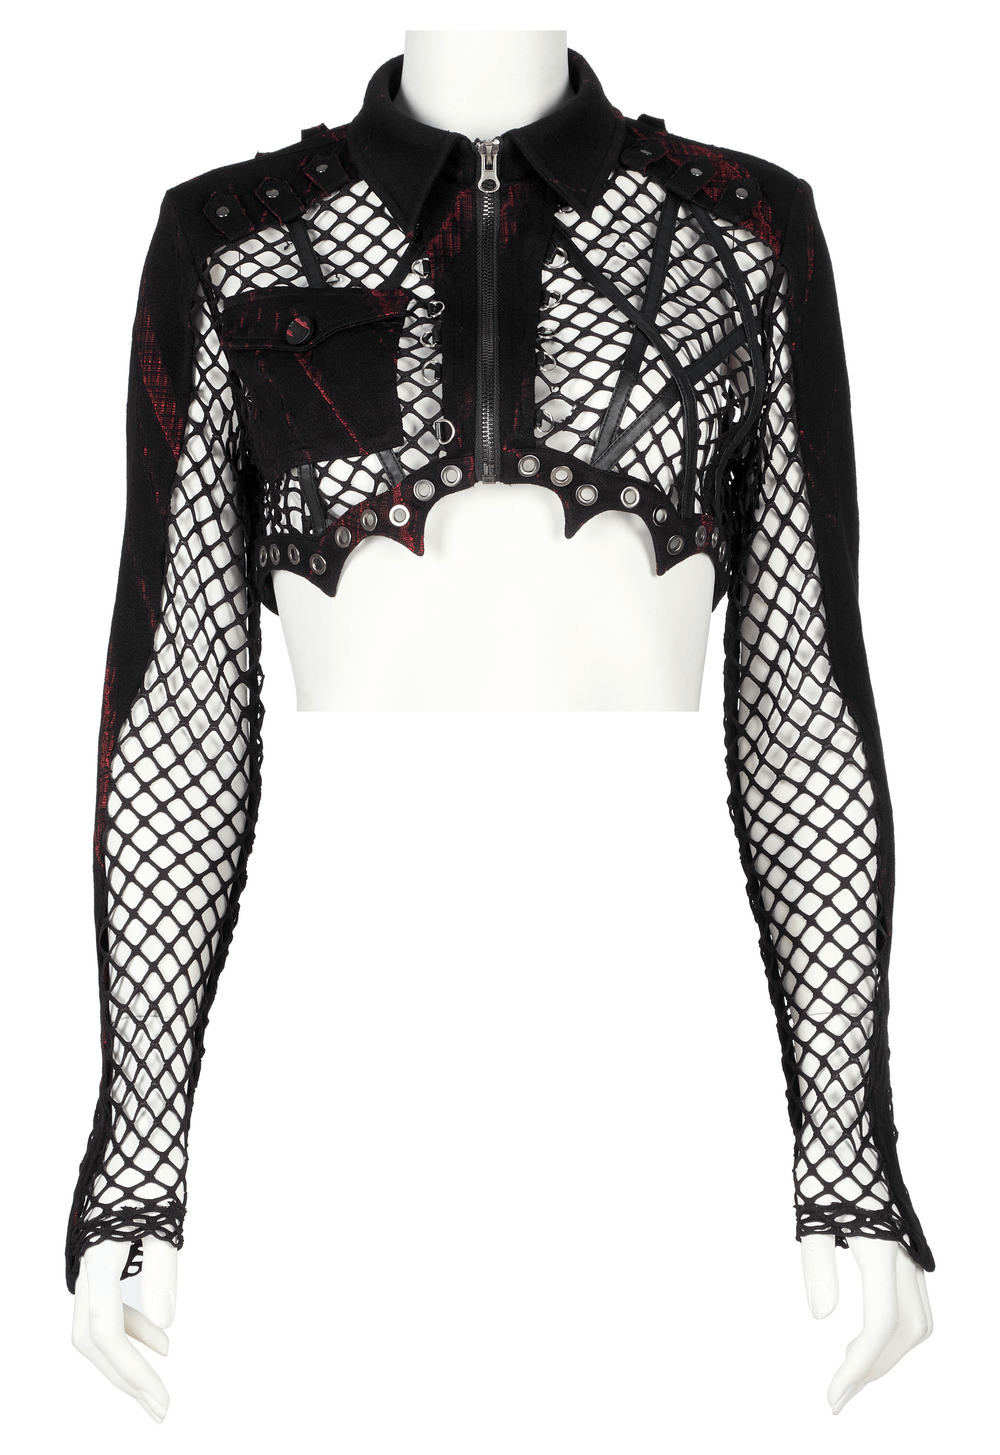 Edgy Punk Crop Top with Fishnet Sleeves and Leather Trim - HARD'N'HEAVY